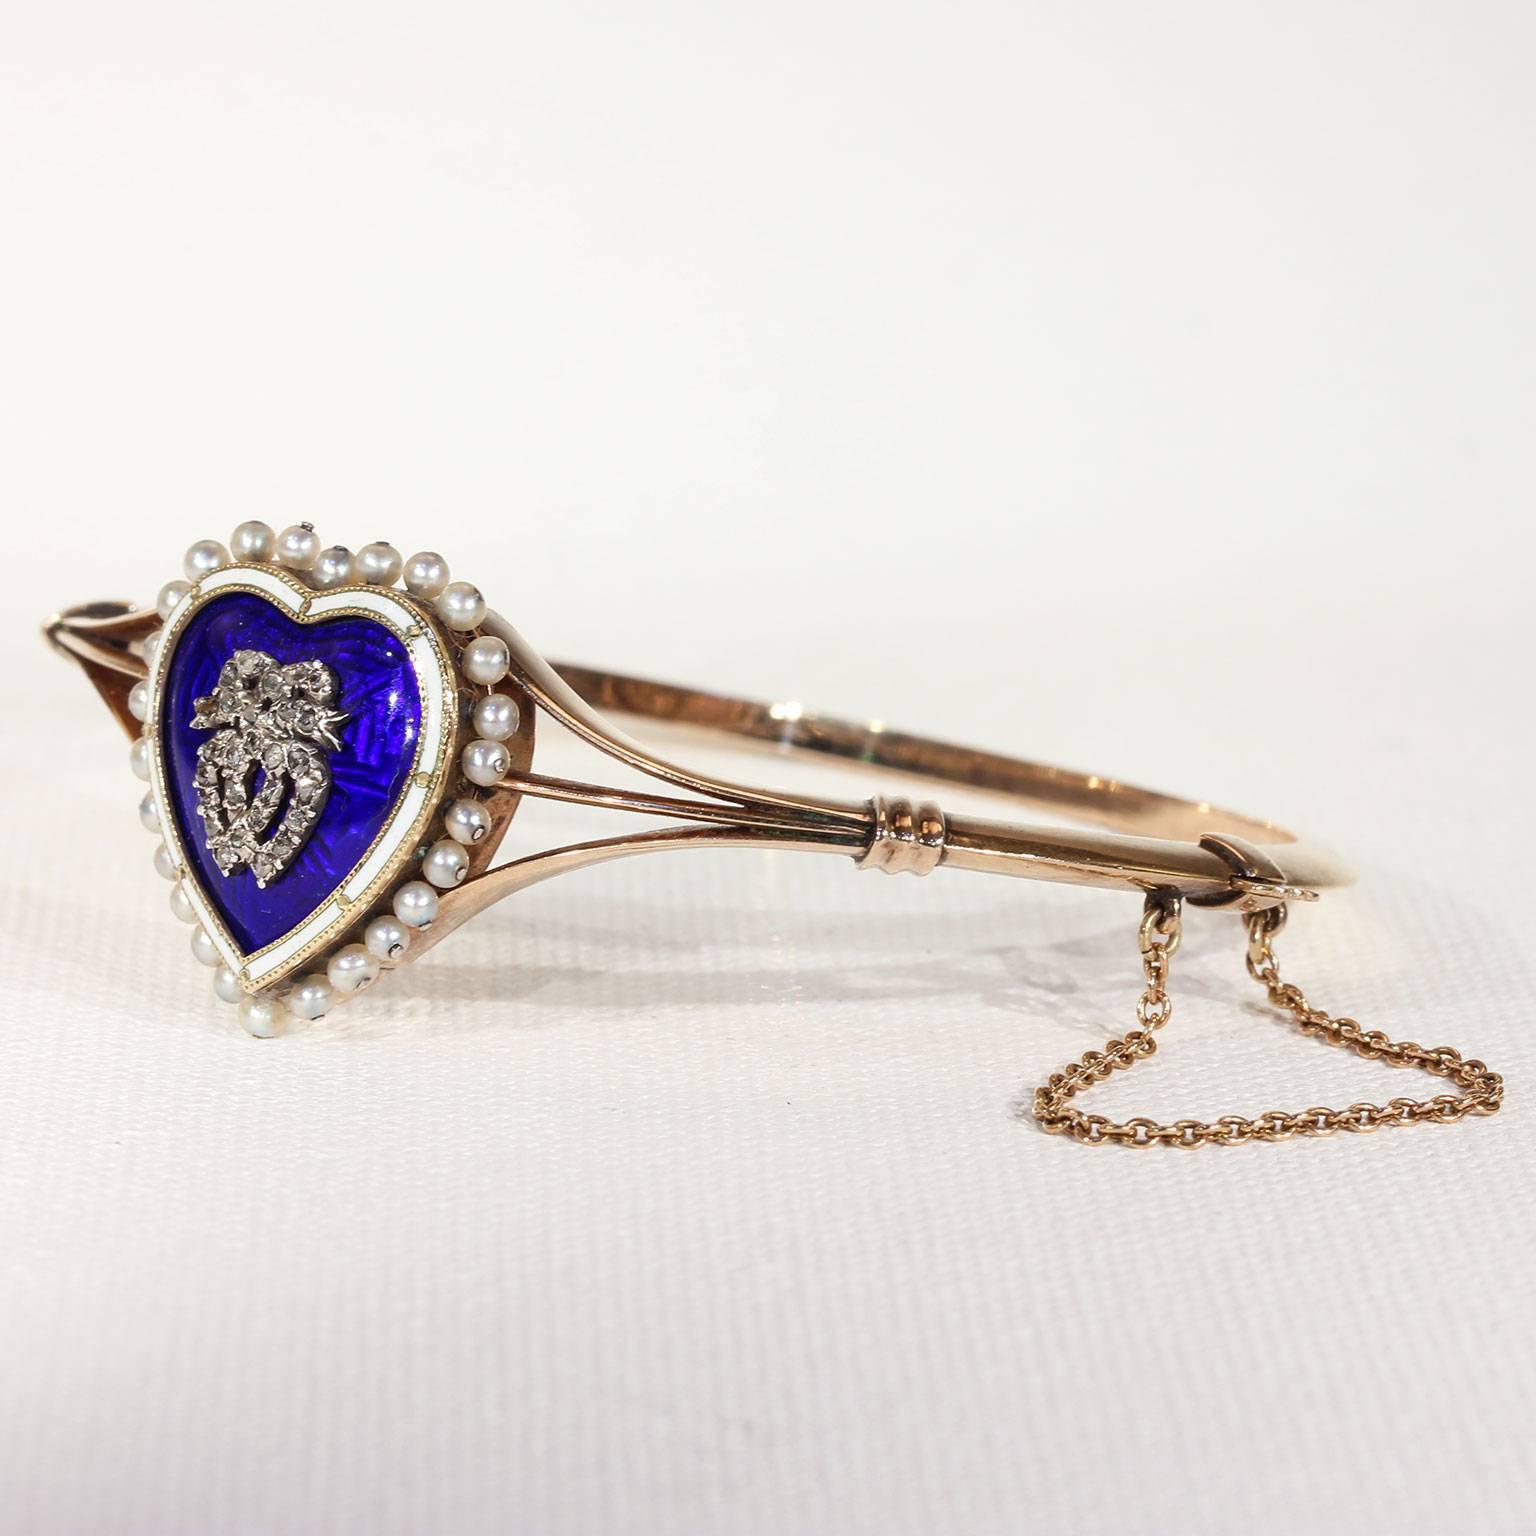 Set in a halo of 26 pearls, the face of this bangle features a blue enamel heart with a white edging. The heart is set with interlocking twin hearts topped with a bow, these are crafted in silver and set with tiny rose cut diamonds. However, this